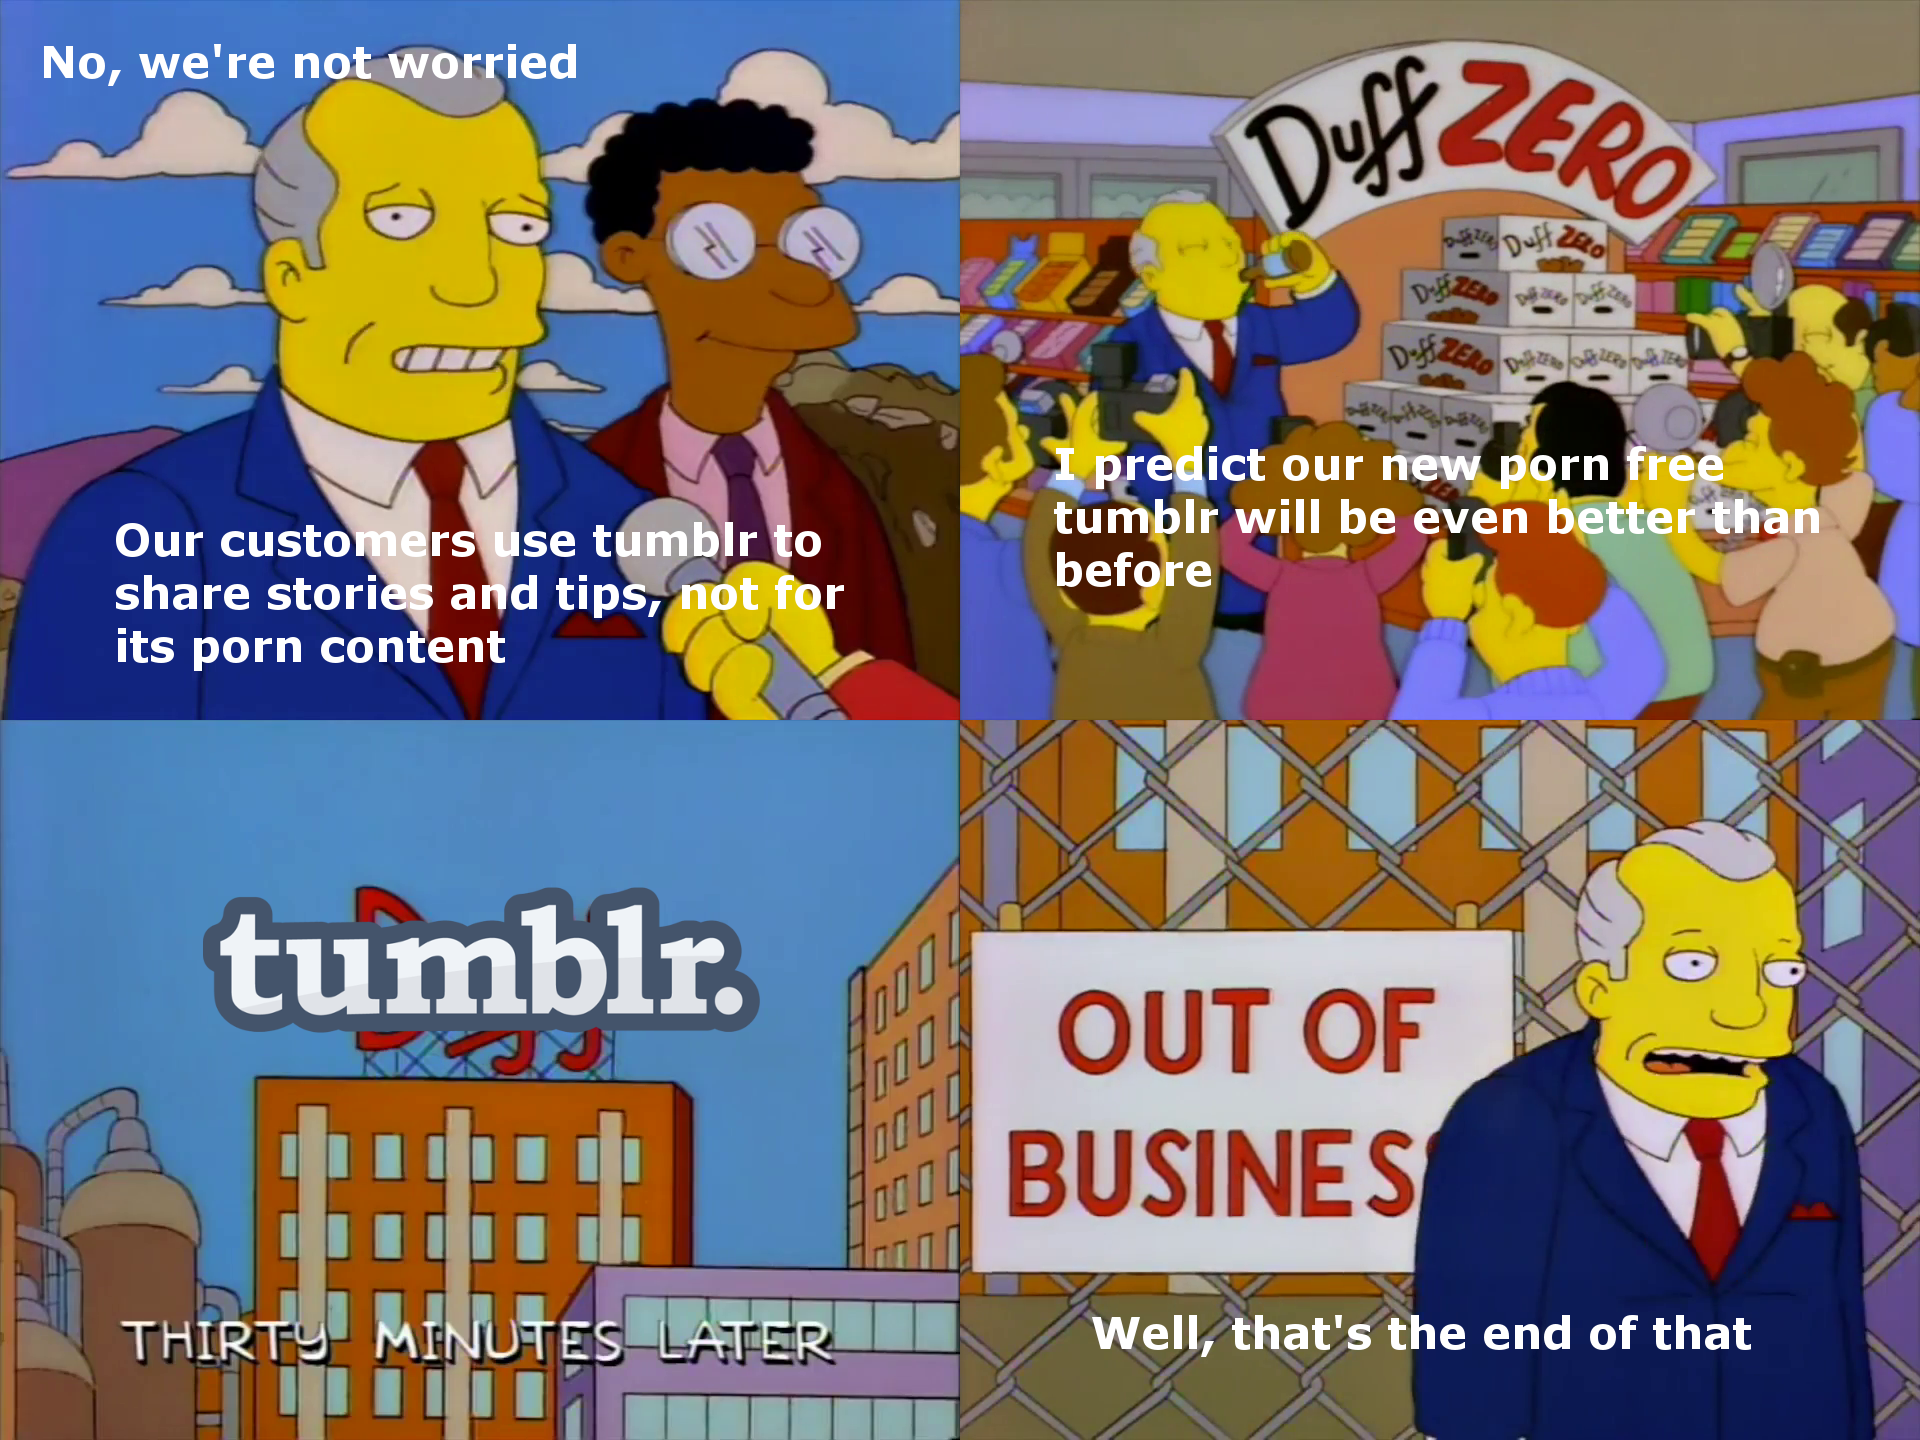 simpsons duff out of business - No, we're not worried Dusce Duiz Ee Our customers use tumblr to stories and tips, not for its porn content I predict our new porn free tumblr will be even better than before tumblr. Out Of Busines Thirty Minutes Later Titt 